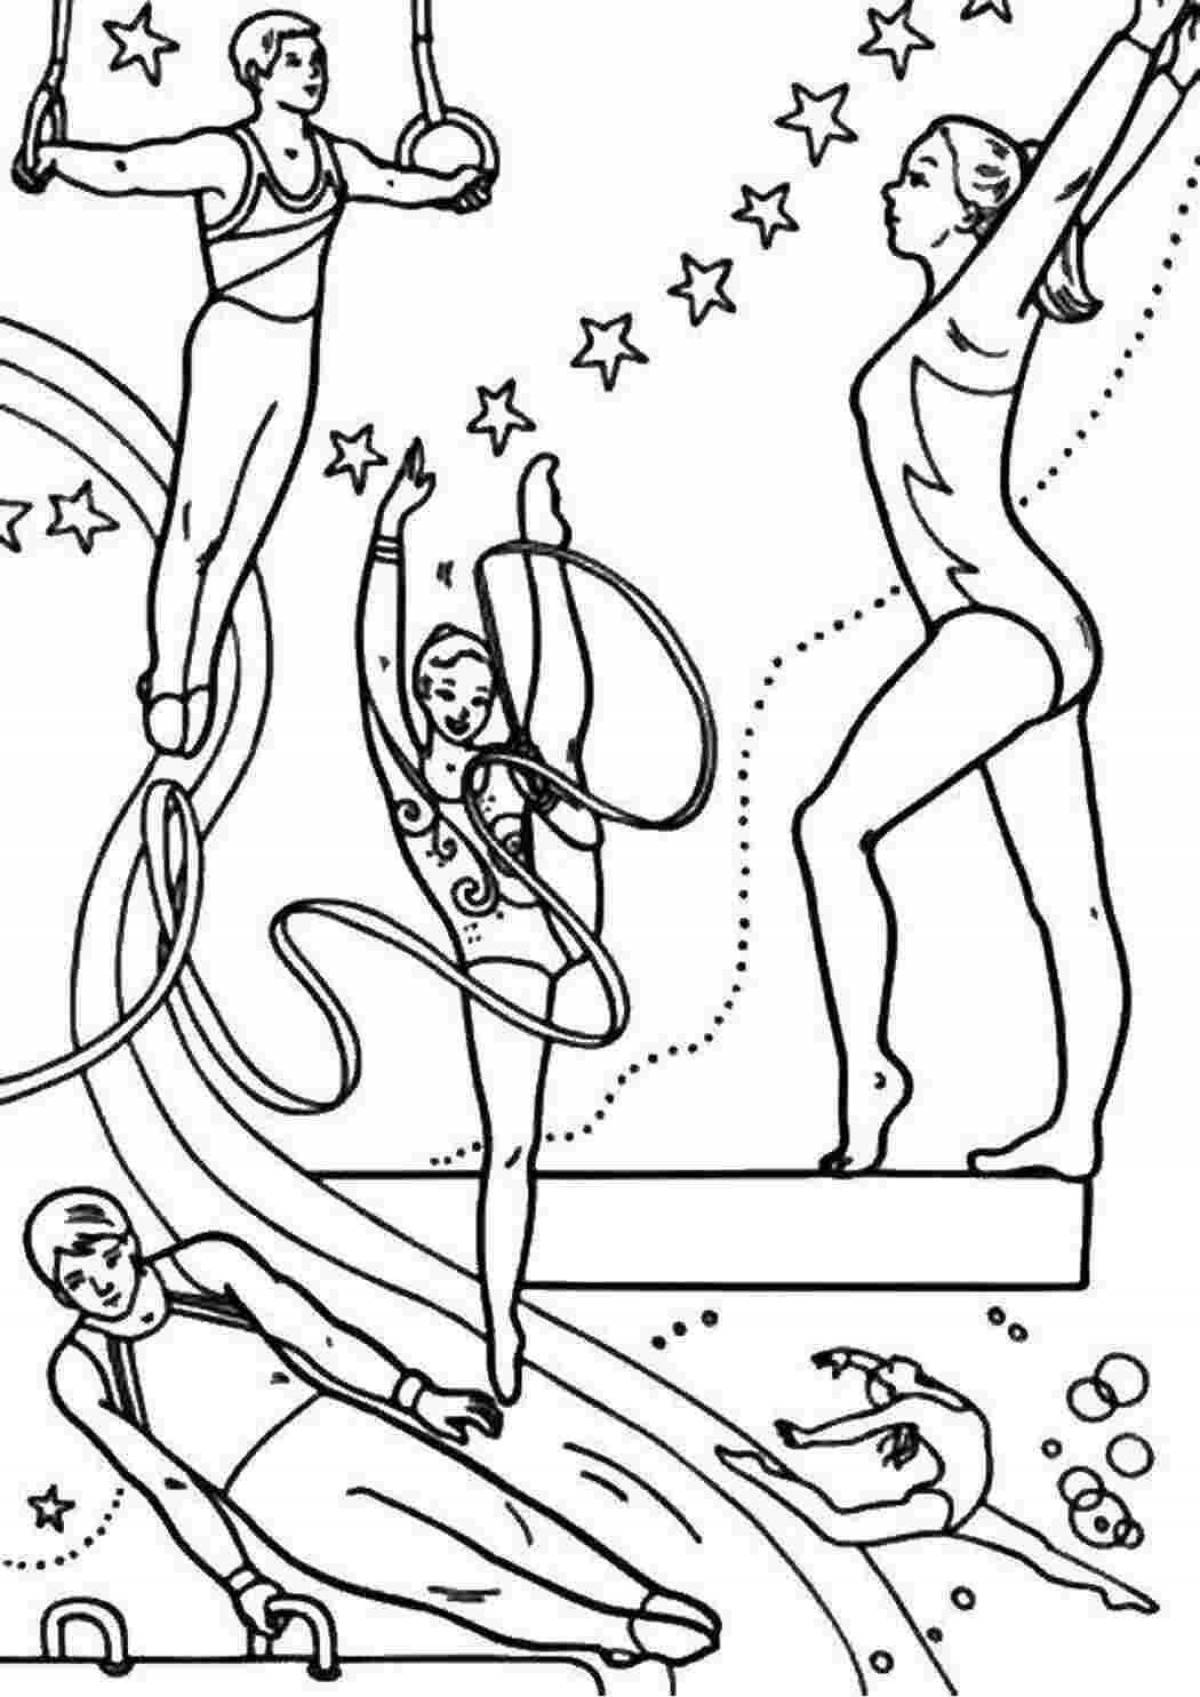 Awesome aerial gymnastics coloring page